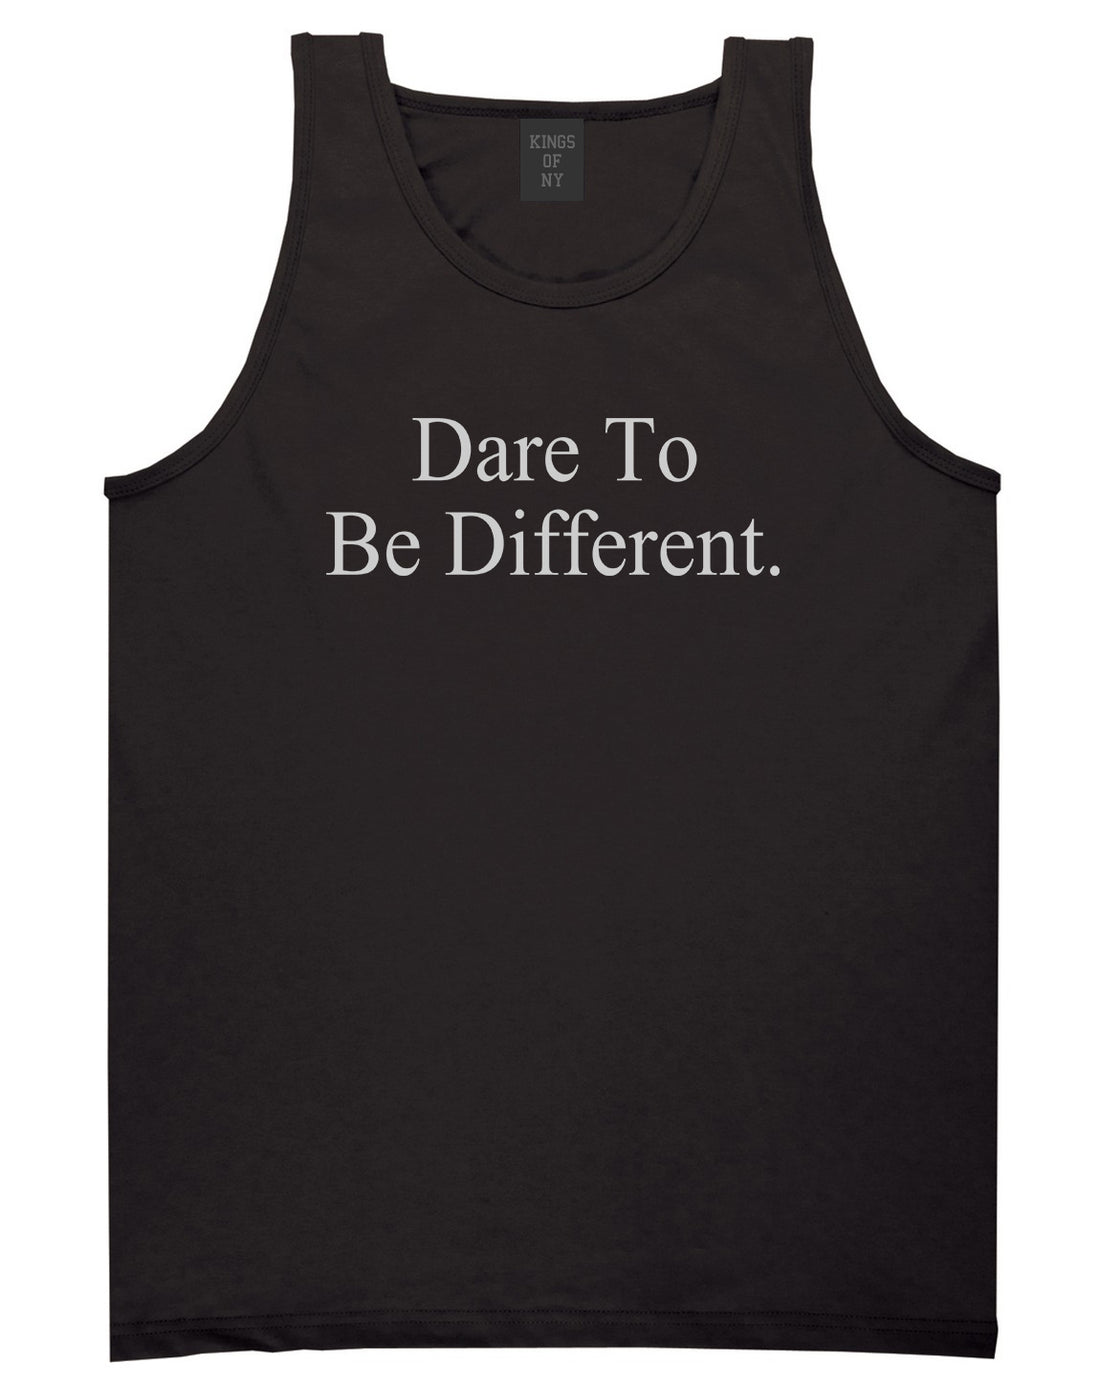 Dare_To_Be_Different Mens Black Tank Top Shirt by Kings Of NY